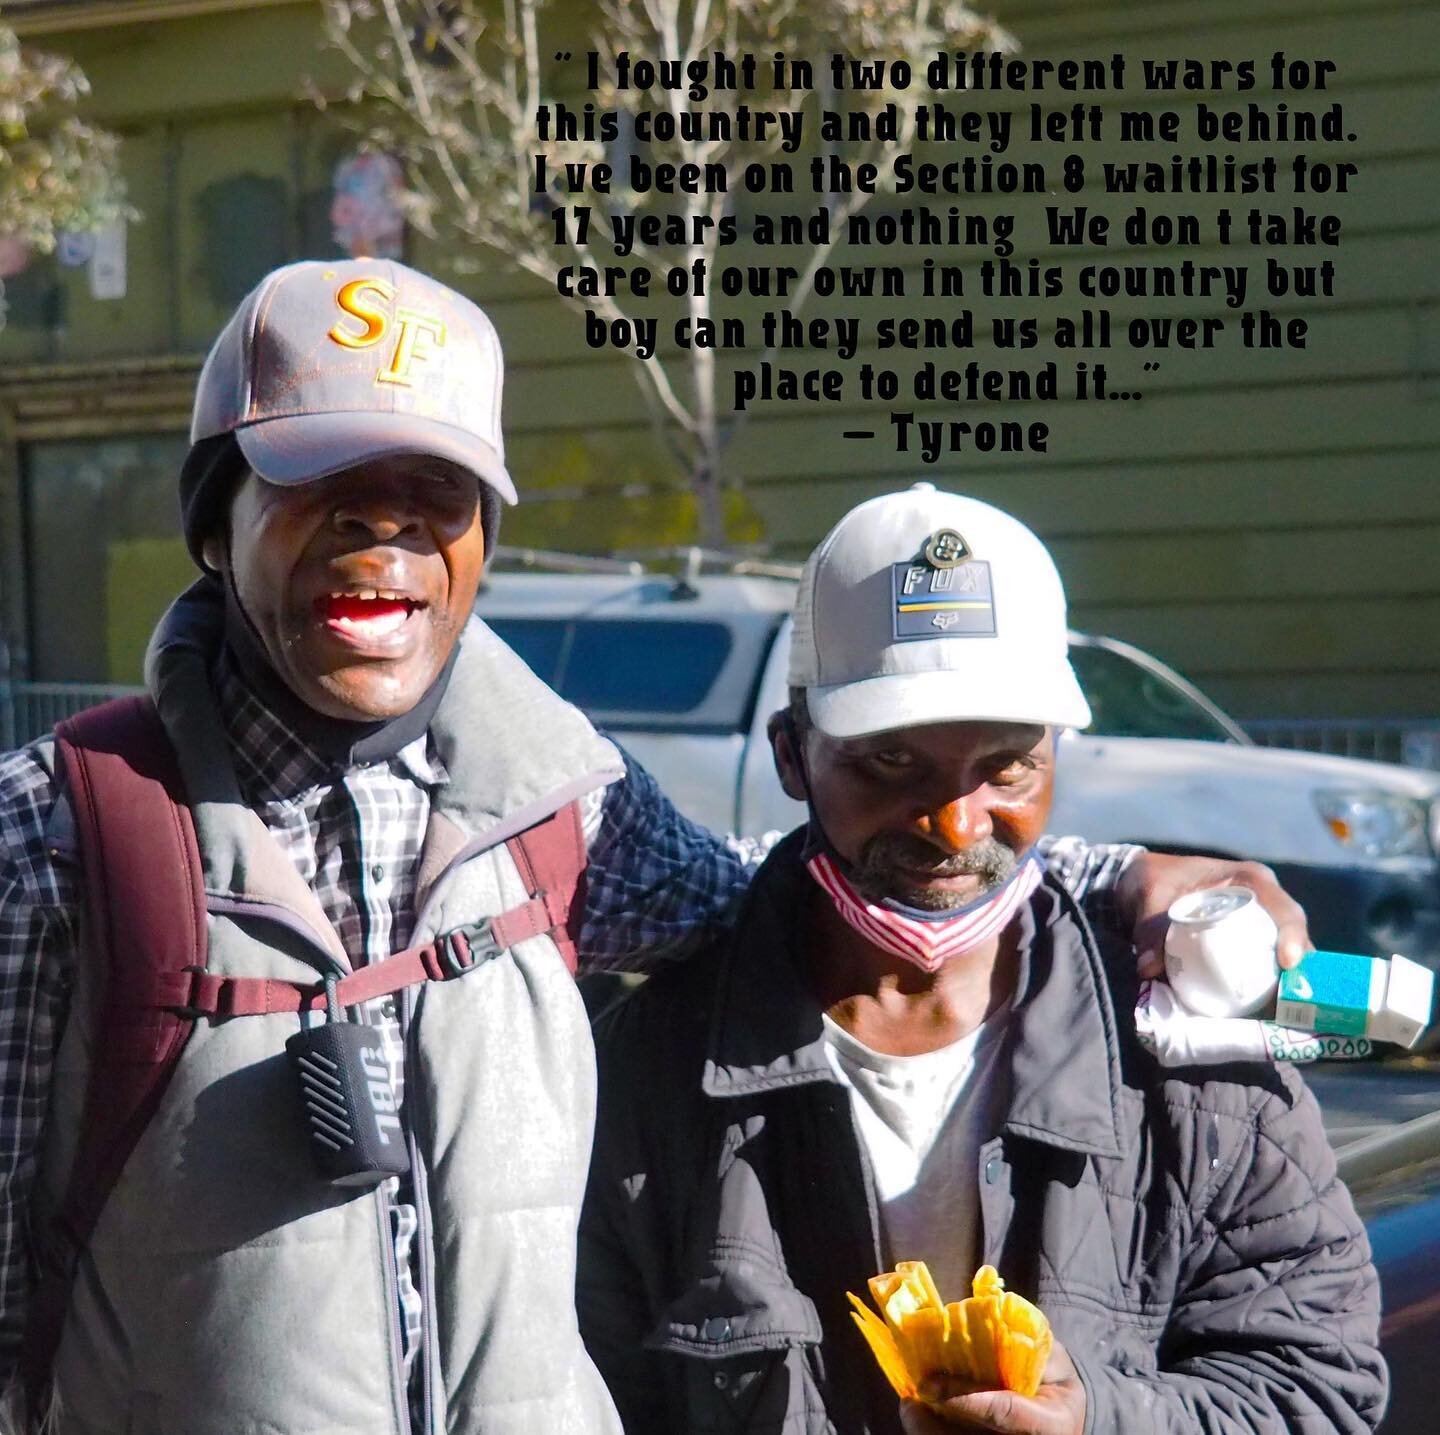 Tyrone is my neighbor and one of many unhouse veterans living in San Francisco.  The state that asked them to sacrifice for imperialism has left them out to dry.  When the state fails we must take up the responsibility ourselves. 

Help me feed my ne